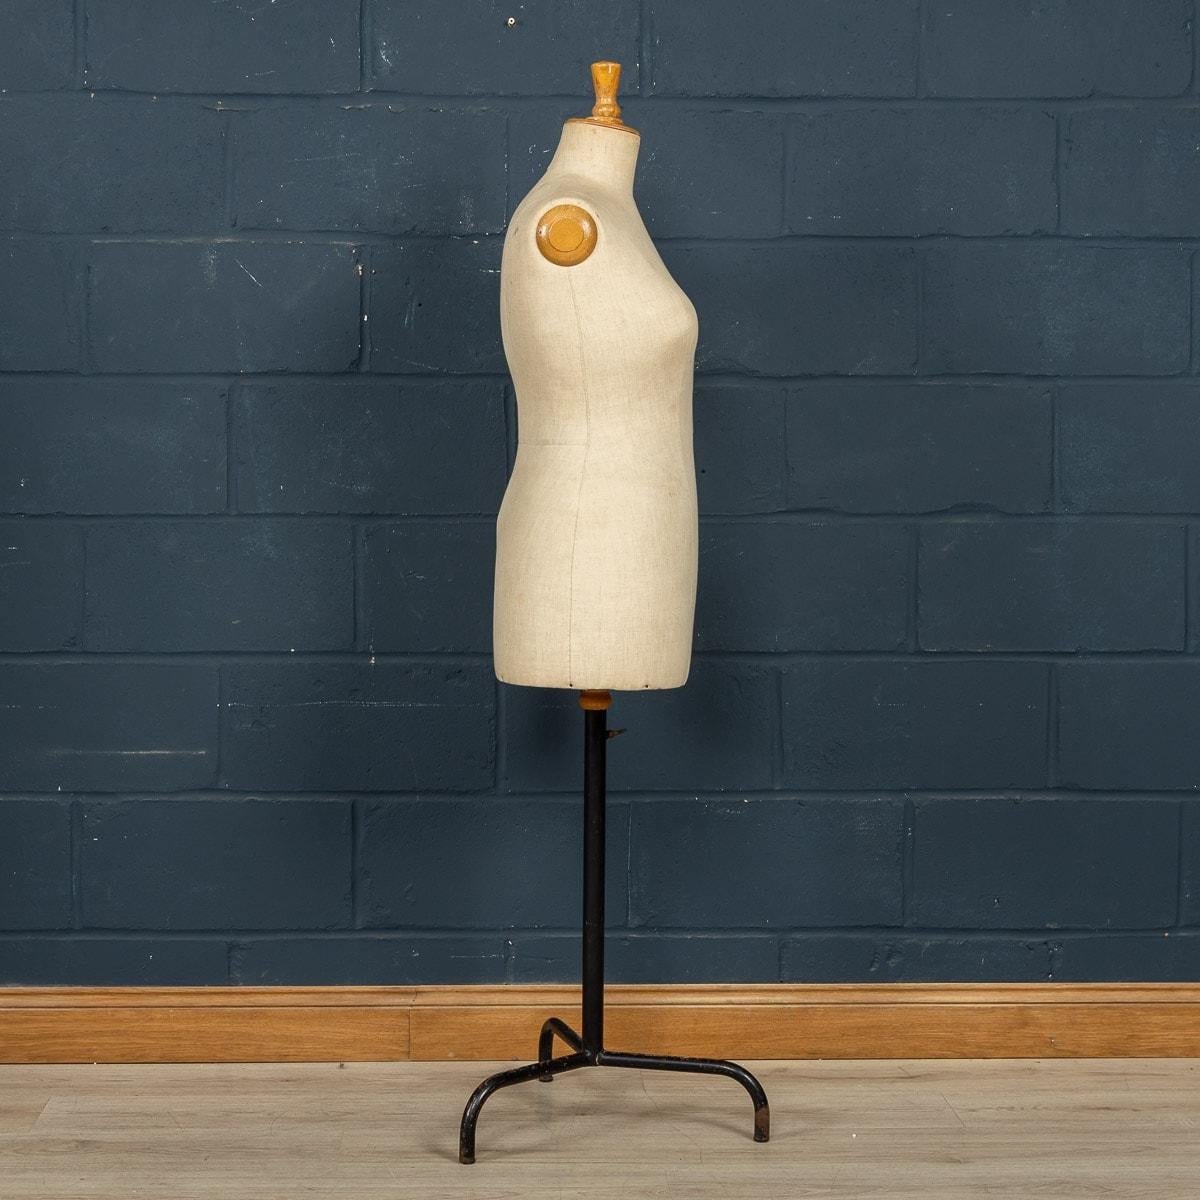 20th Century French Shop Mannequin By Buste Girard, c.1920 For Sale 3